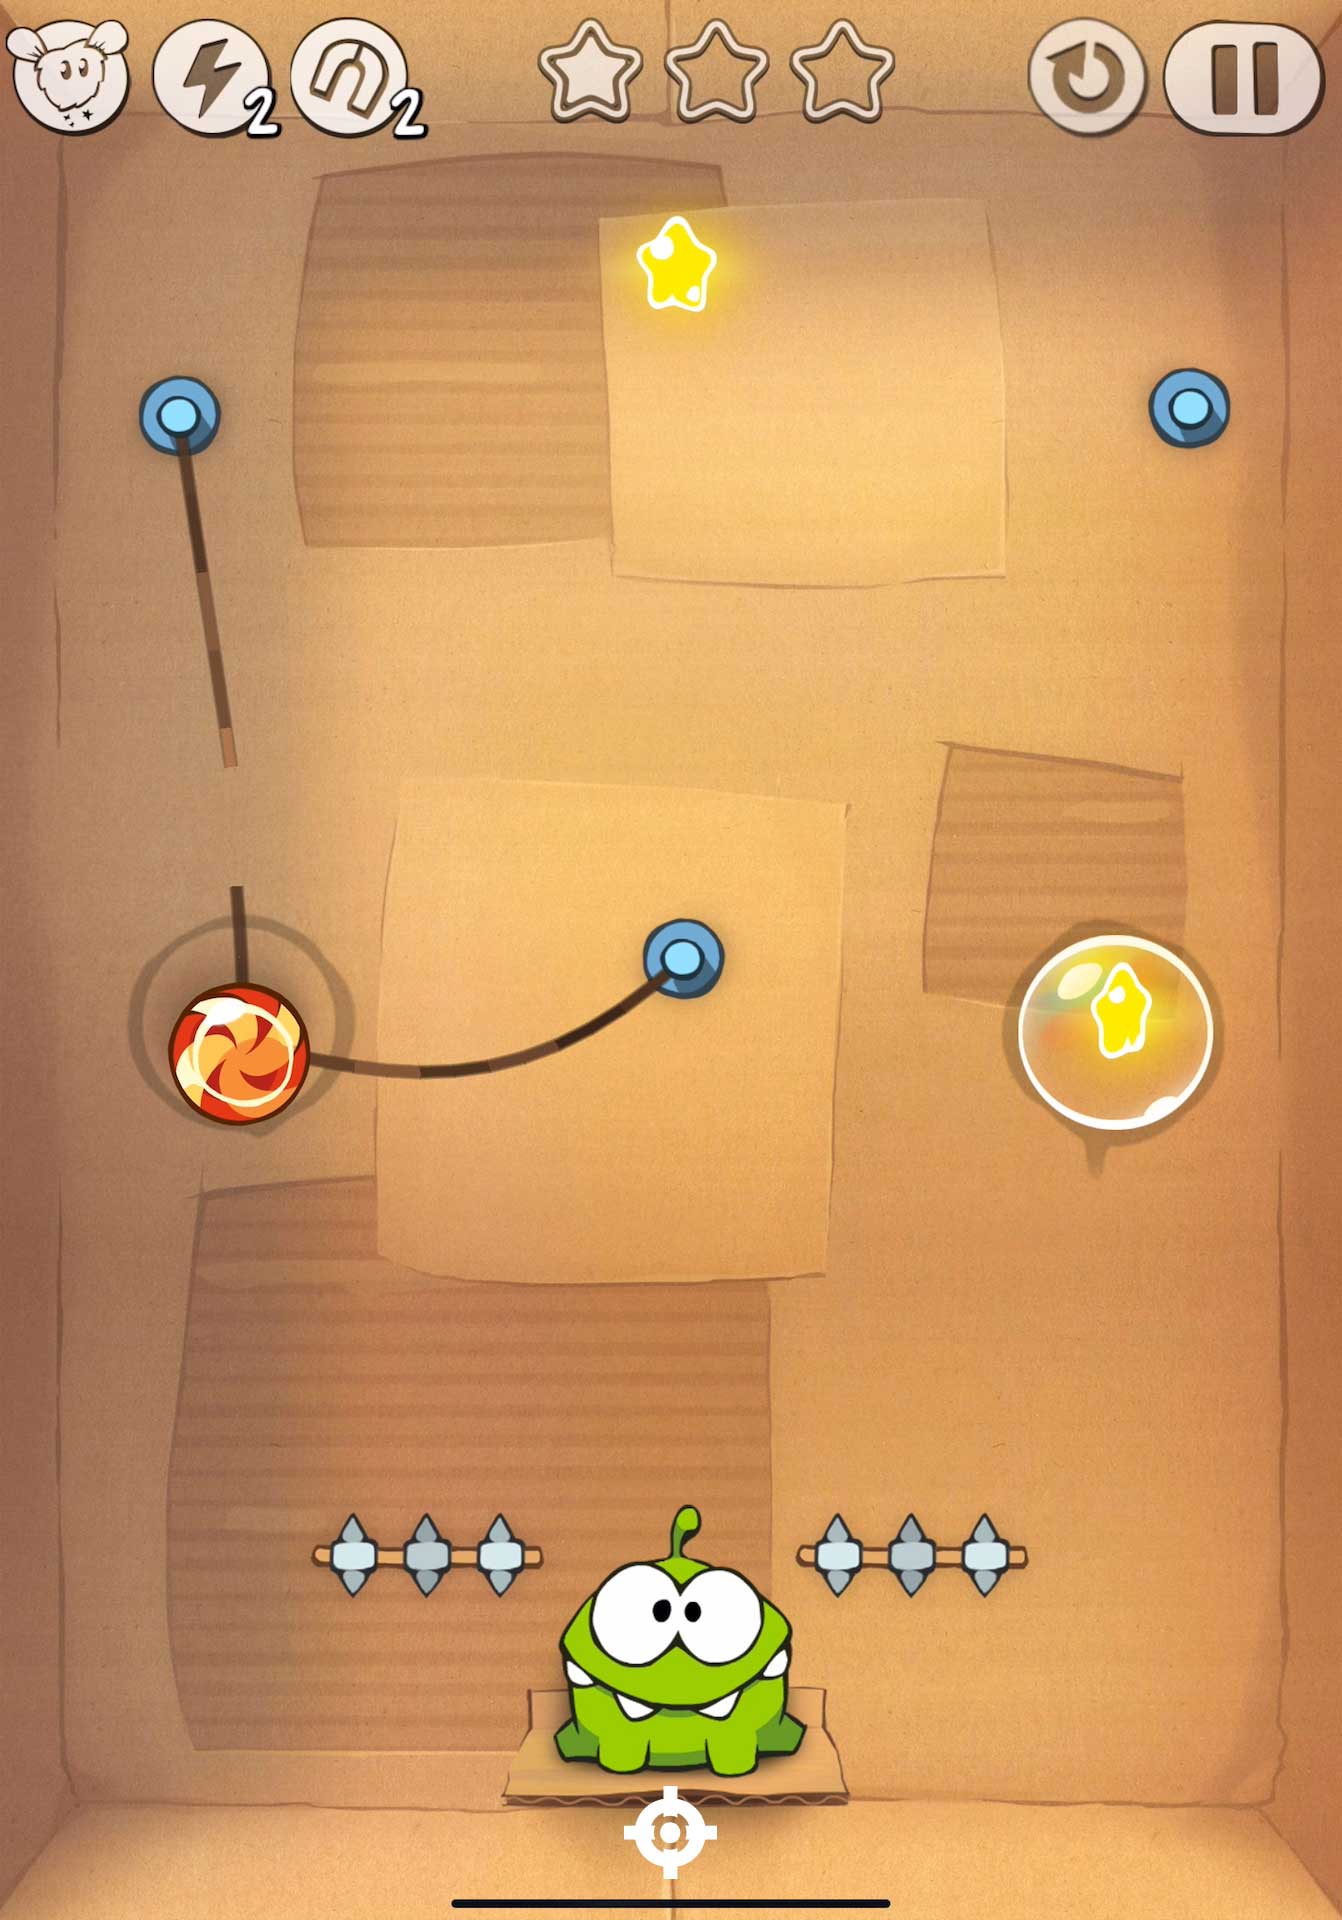 Cut The Rope Daily · Recreo Gamer